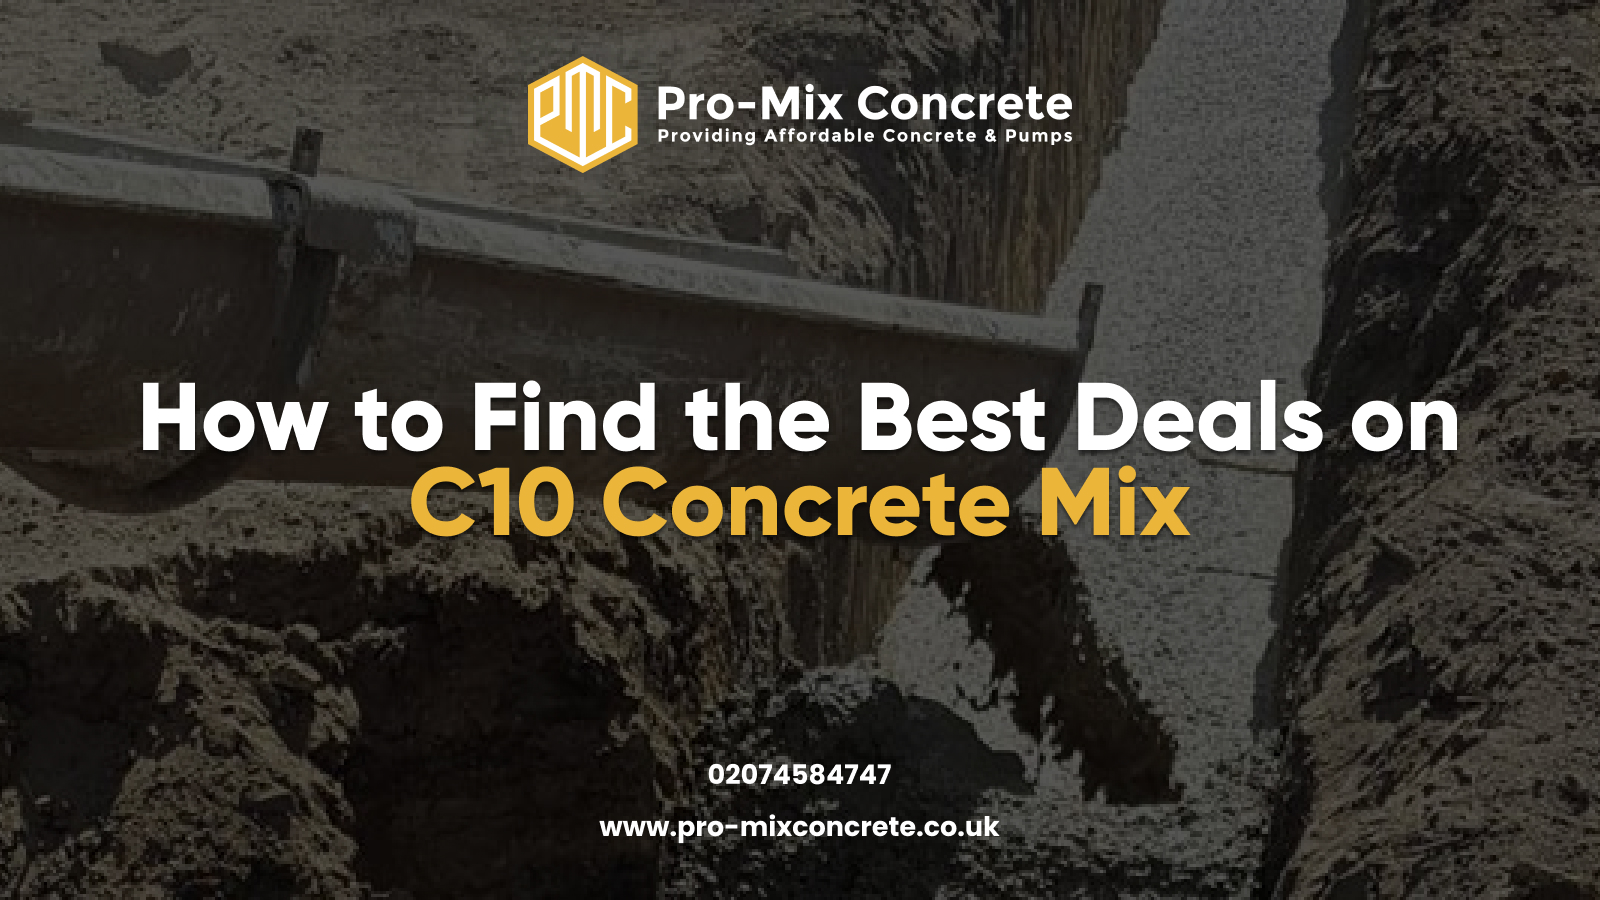 How to Find the Best Deals on C10 Concrete Mix